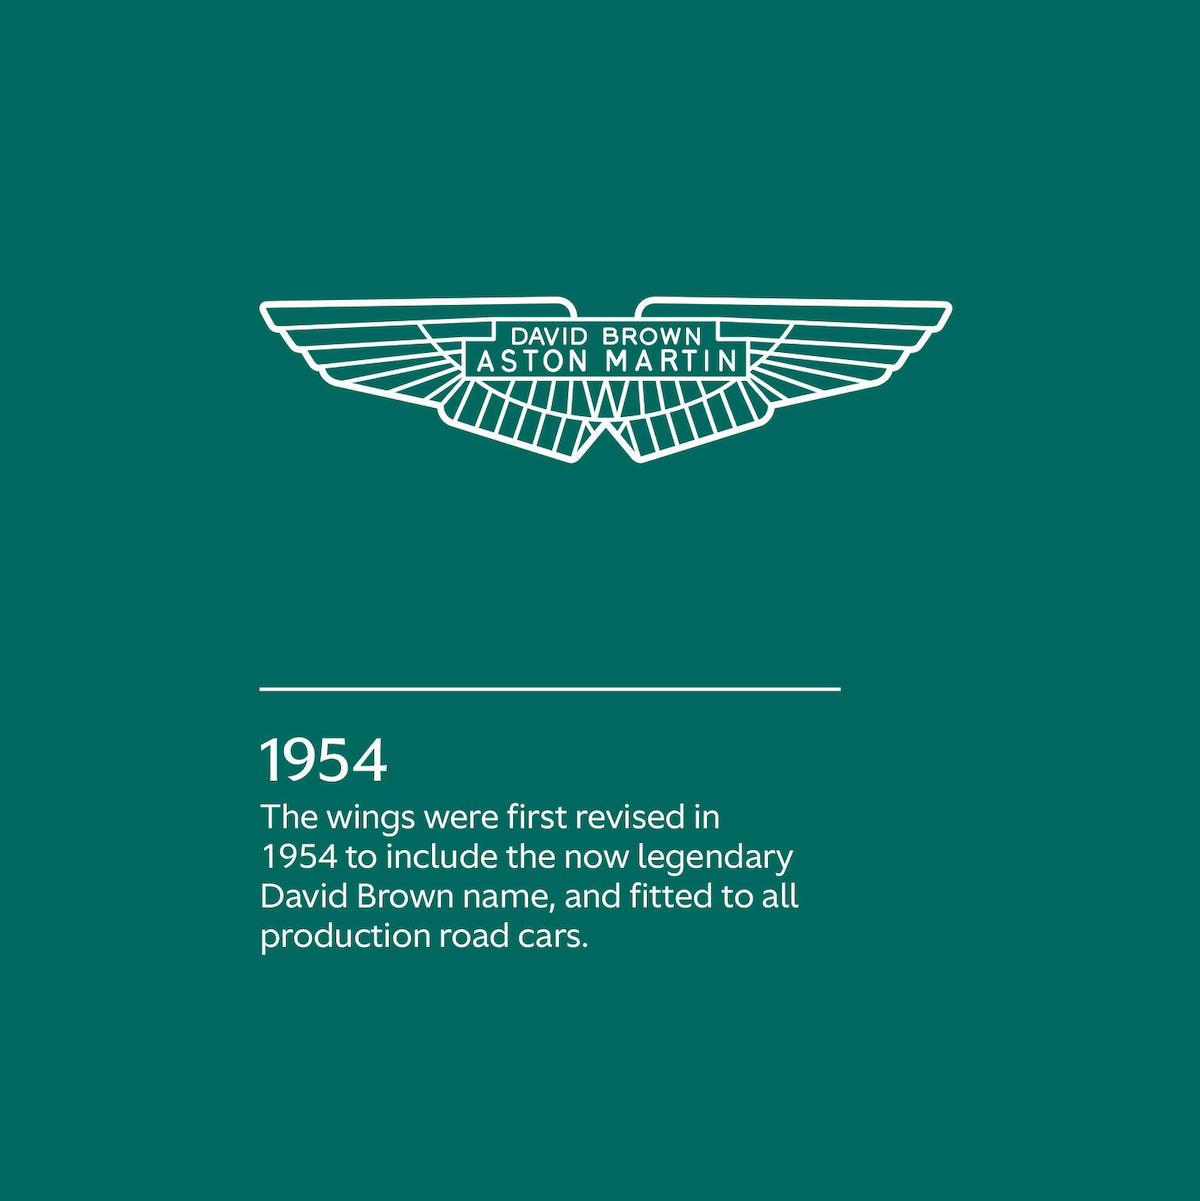 The 1954 version of the Aston Martin wings logo